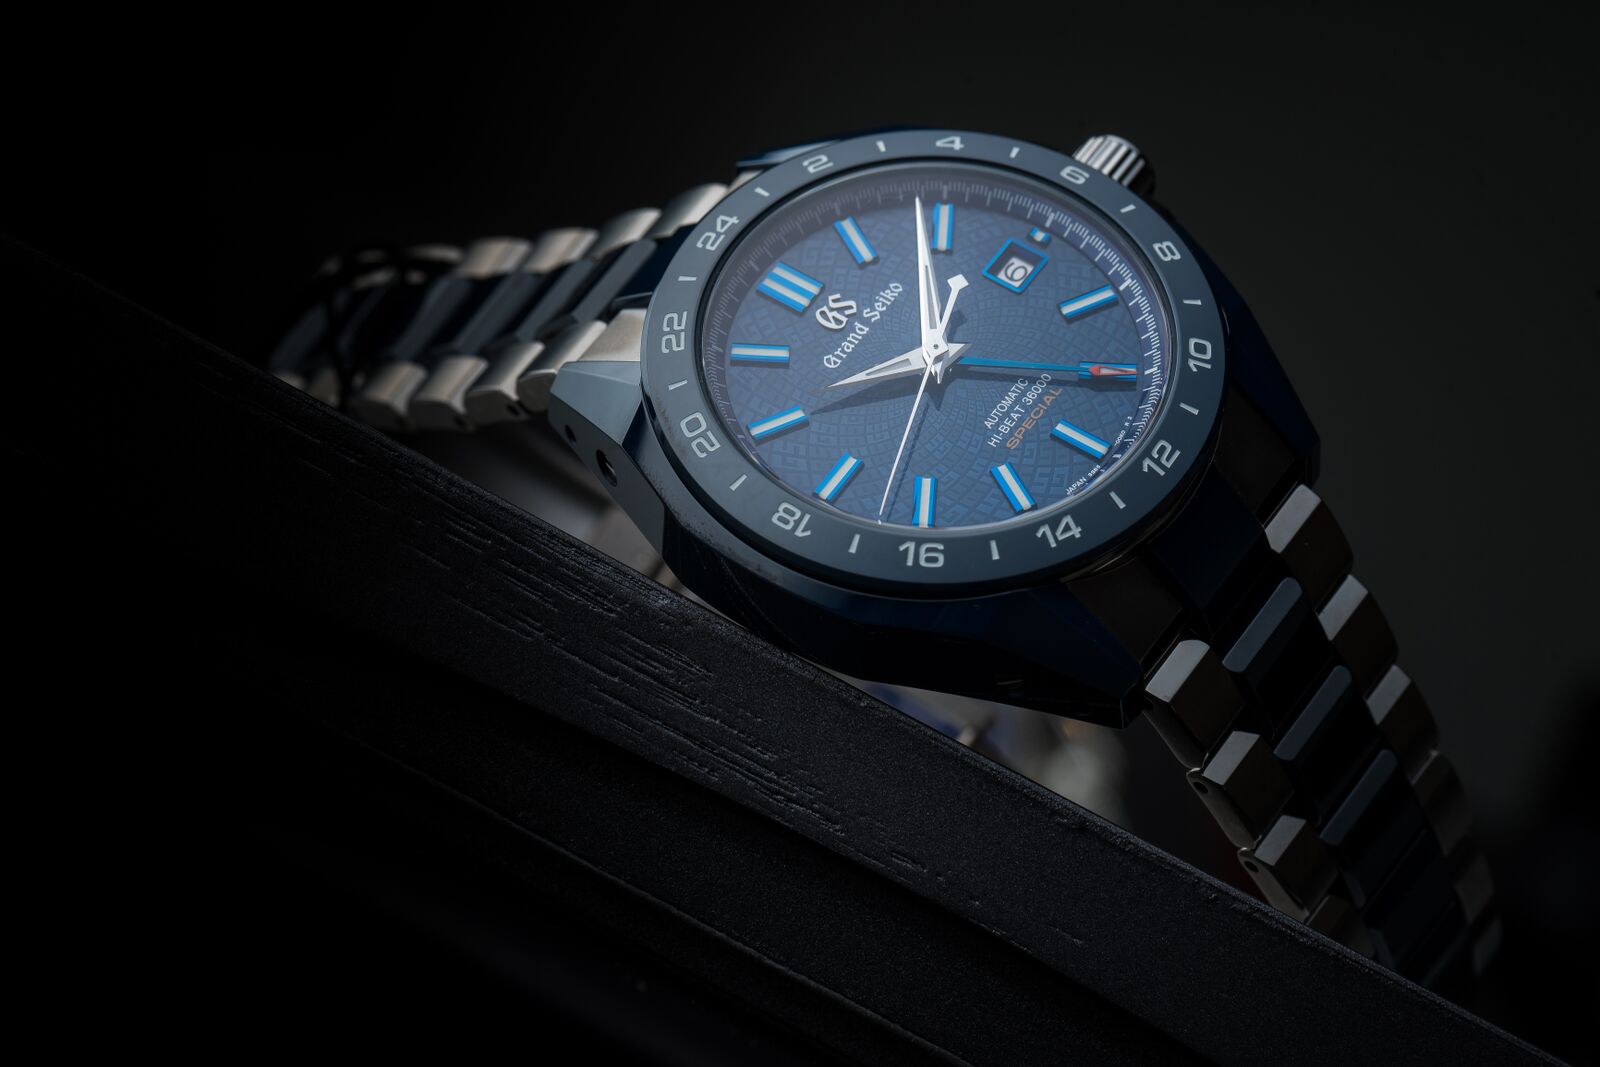 Watch of the Week: Grand Seiko Blue Ceramic Hi-beat GMT “Special” Limited  Edition